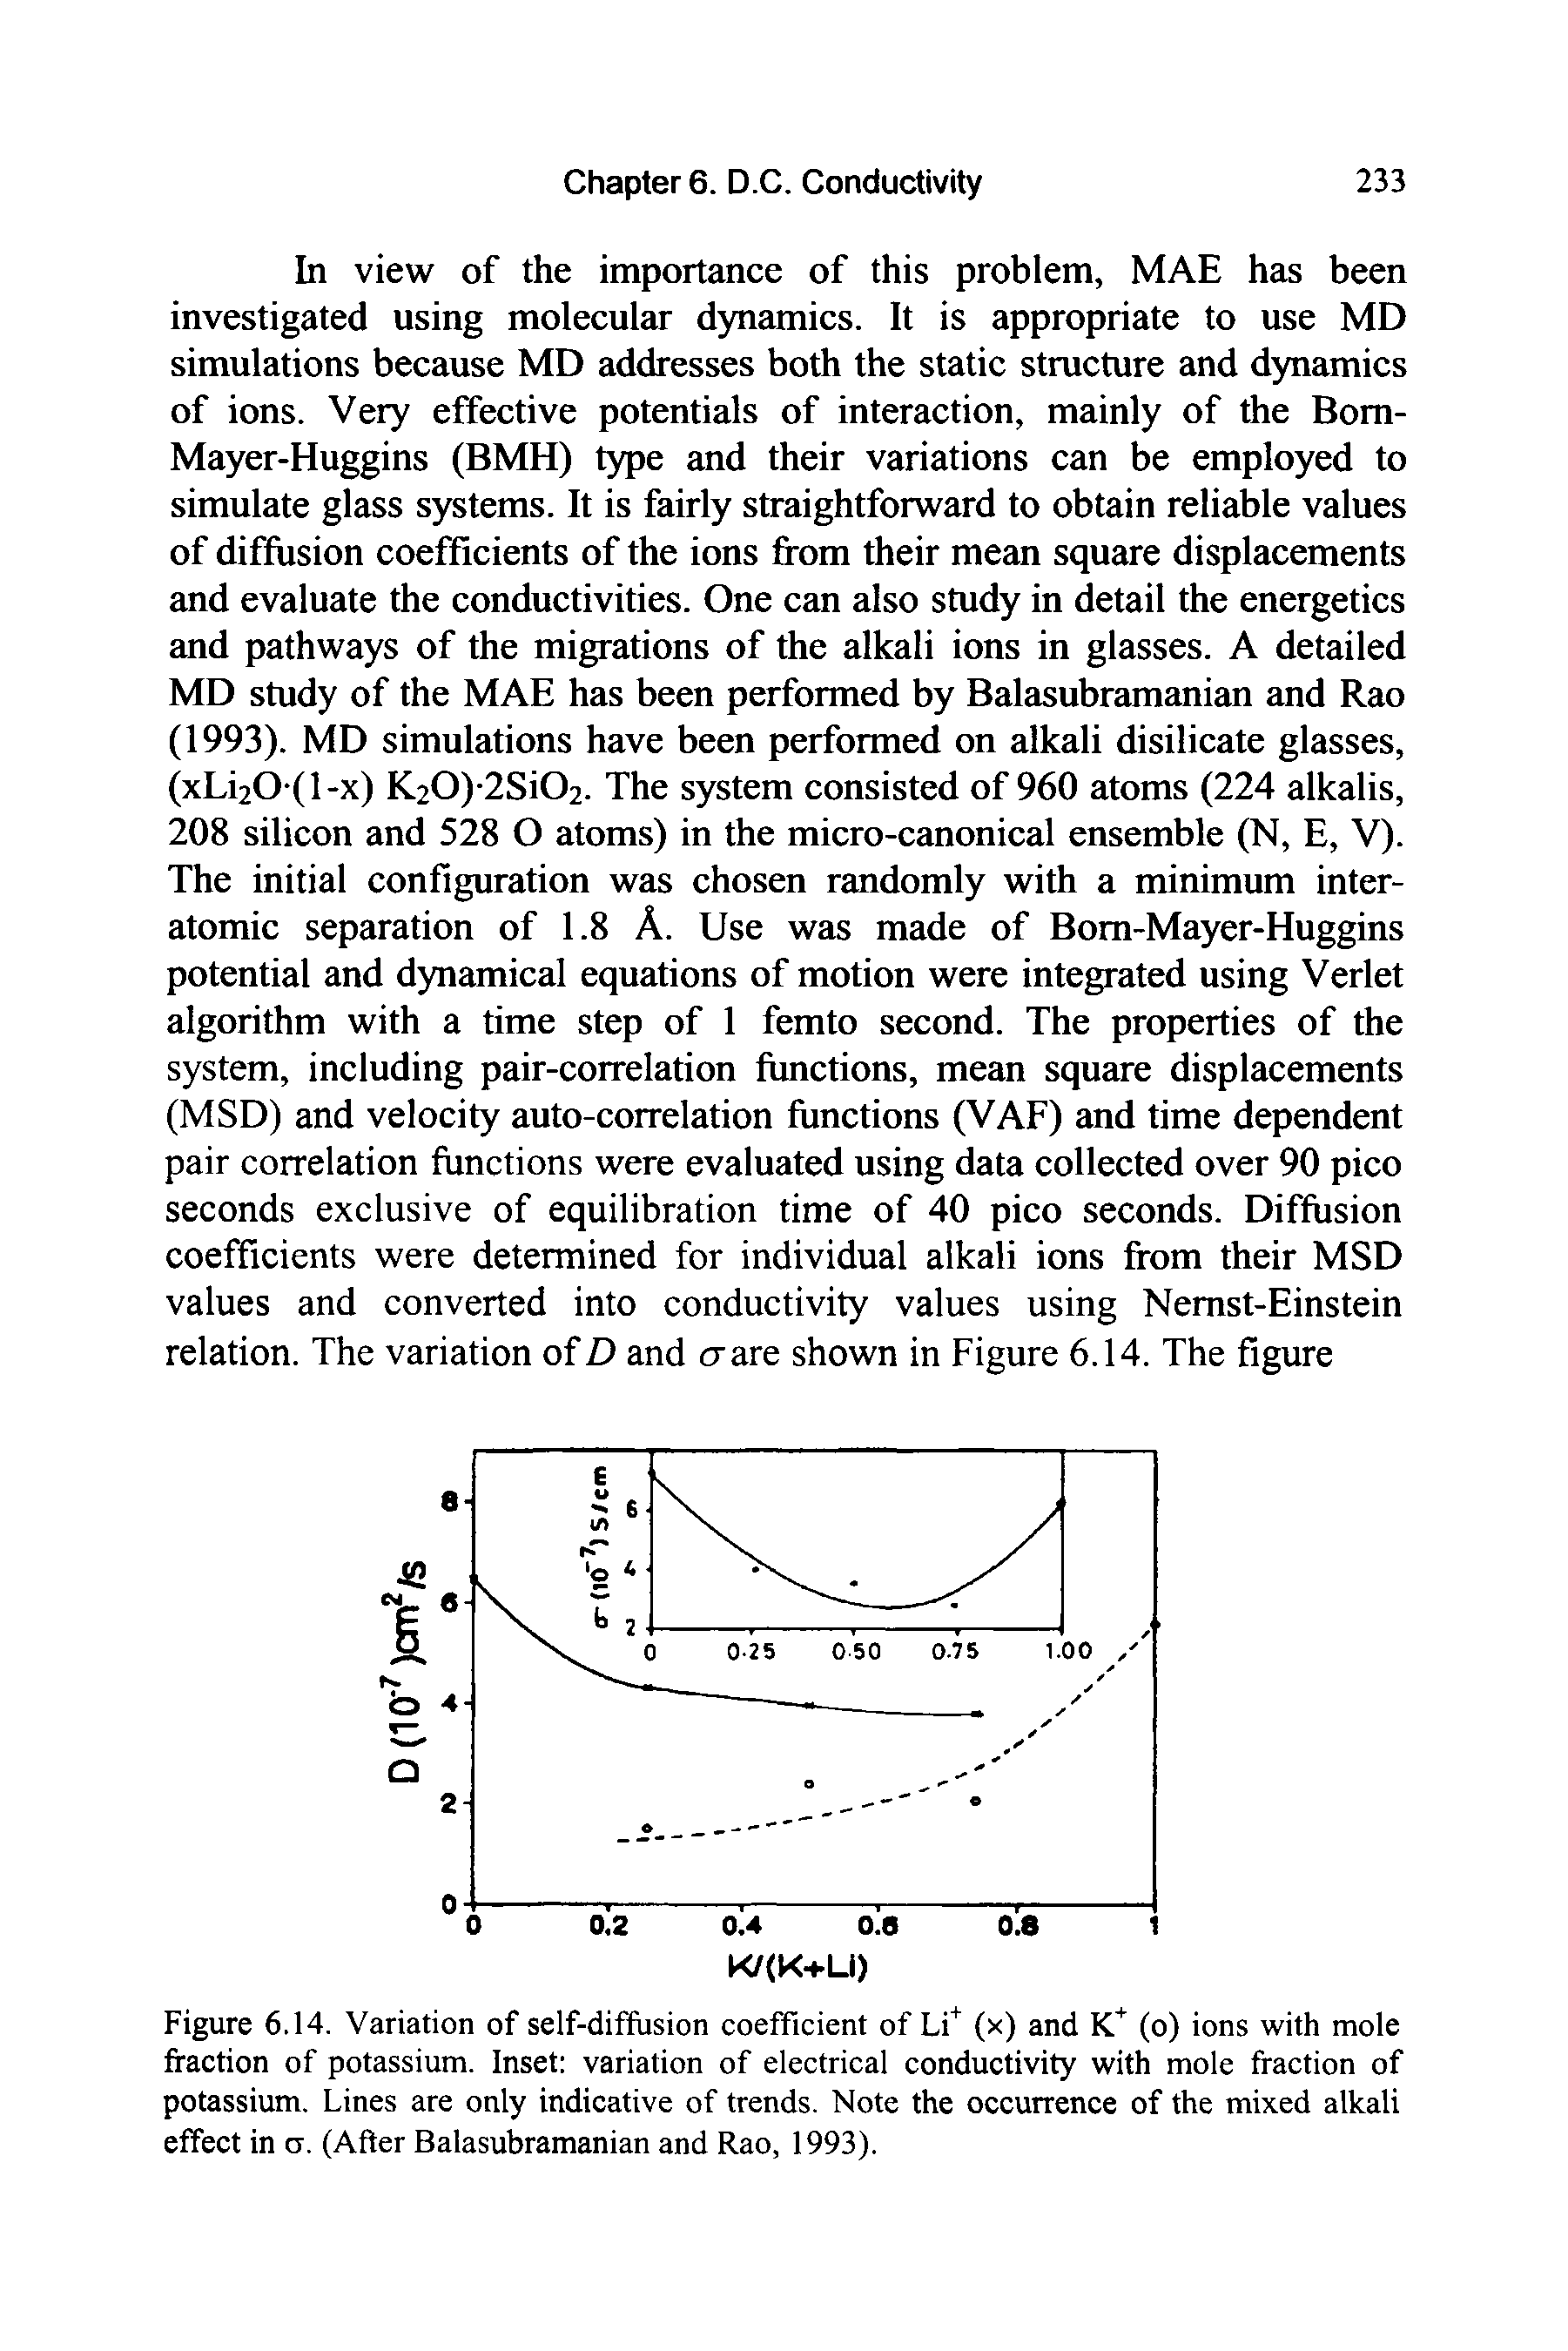 Figure 6.14. Variation of self-diffusion coefficient of LF (x) and (o) ions with mole fraction of potassium. Inset variation of electrical conductivity with mole fraction of potassium. Lines are only indicative of trends. Note the occurrence of the mixed alkali effect in a. (After Balasubramanian and Rao, 1993).